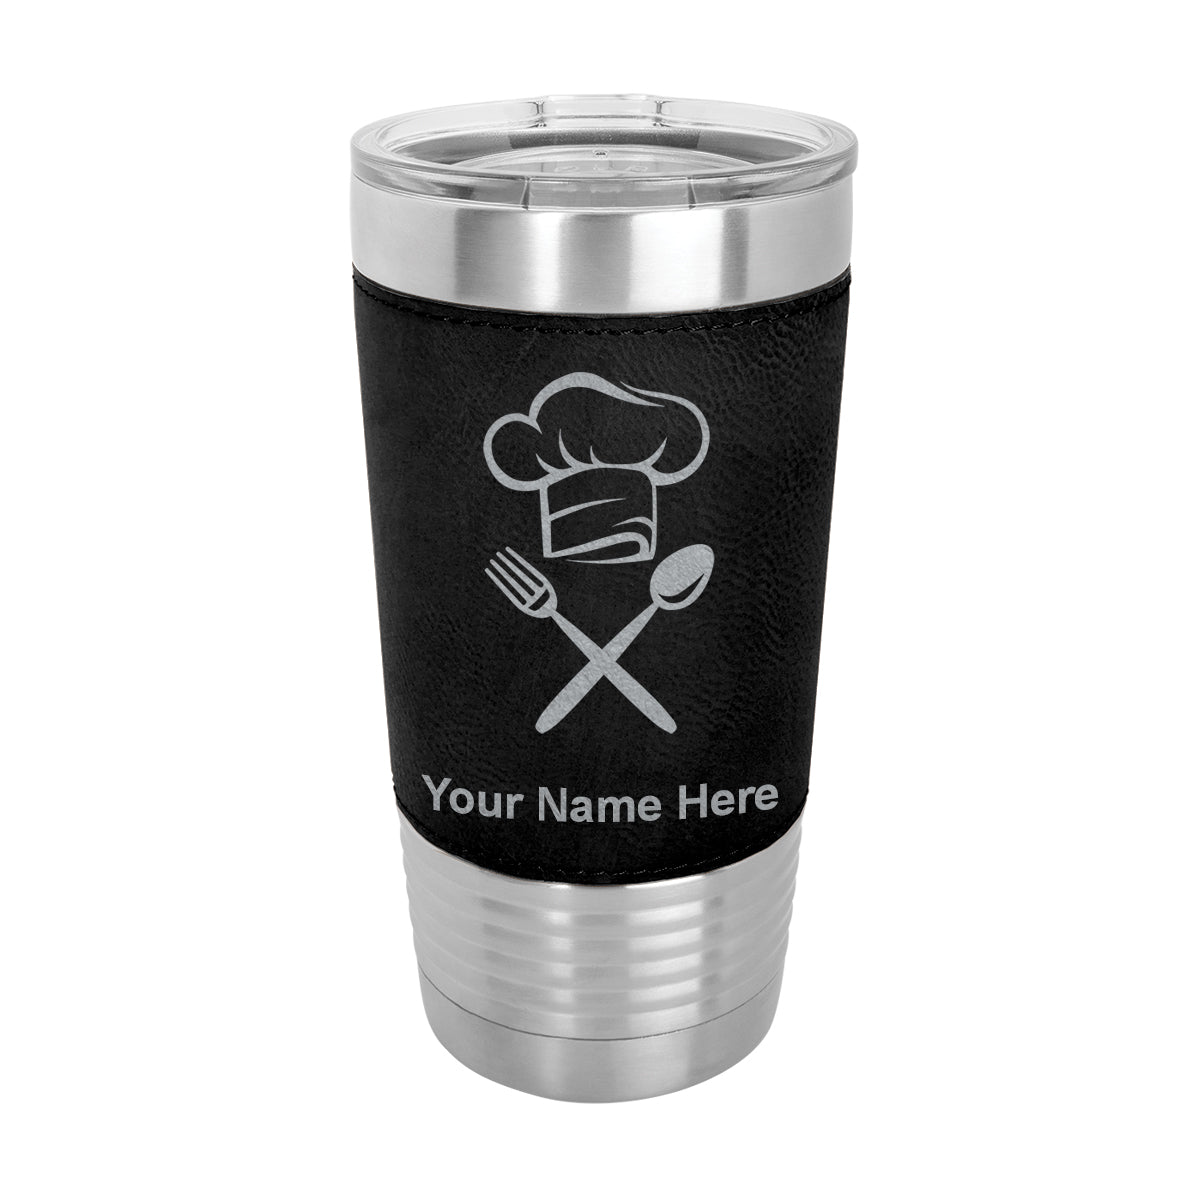 20oz Faux Leather Tumbler Mug, Chef Hat, Personalized Engraving Included - LaserGram Custom Engraved Gifts